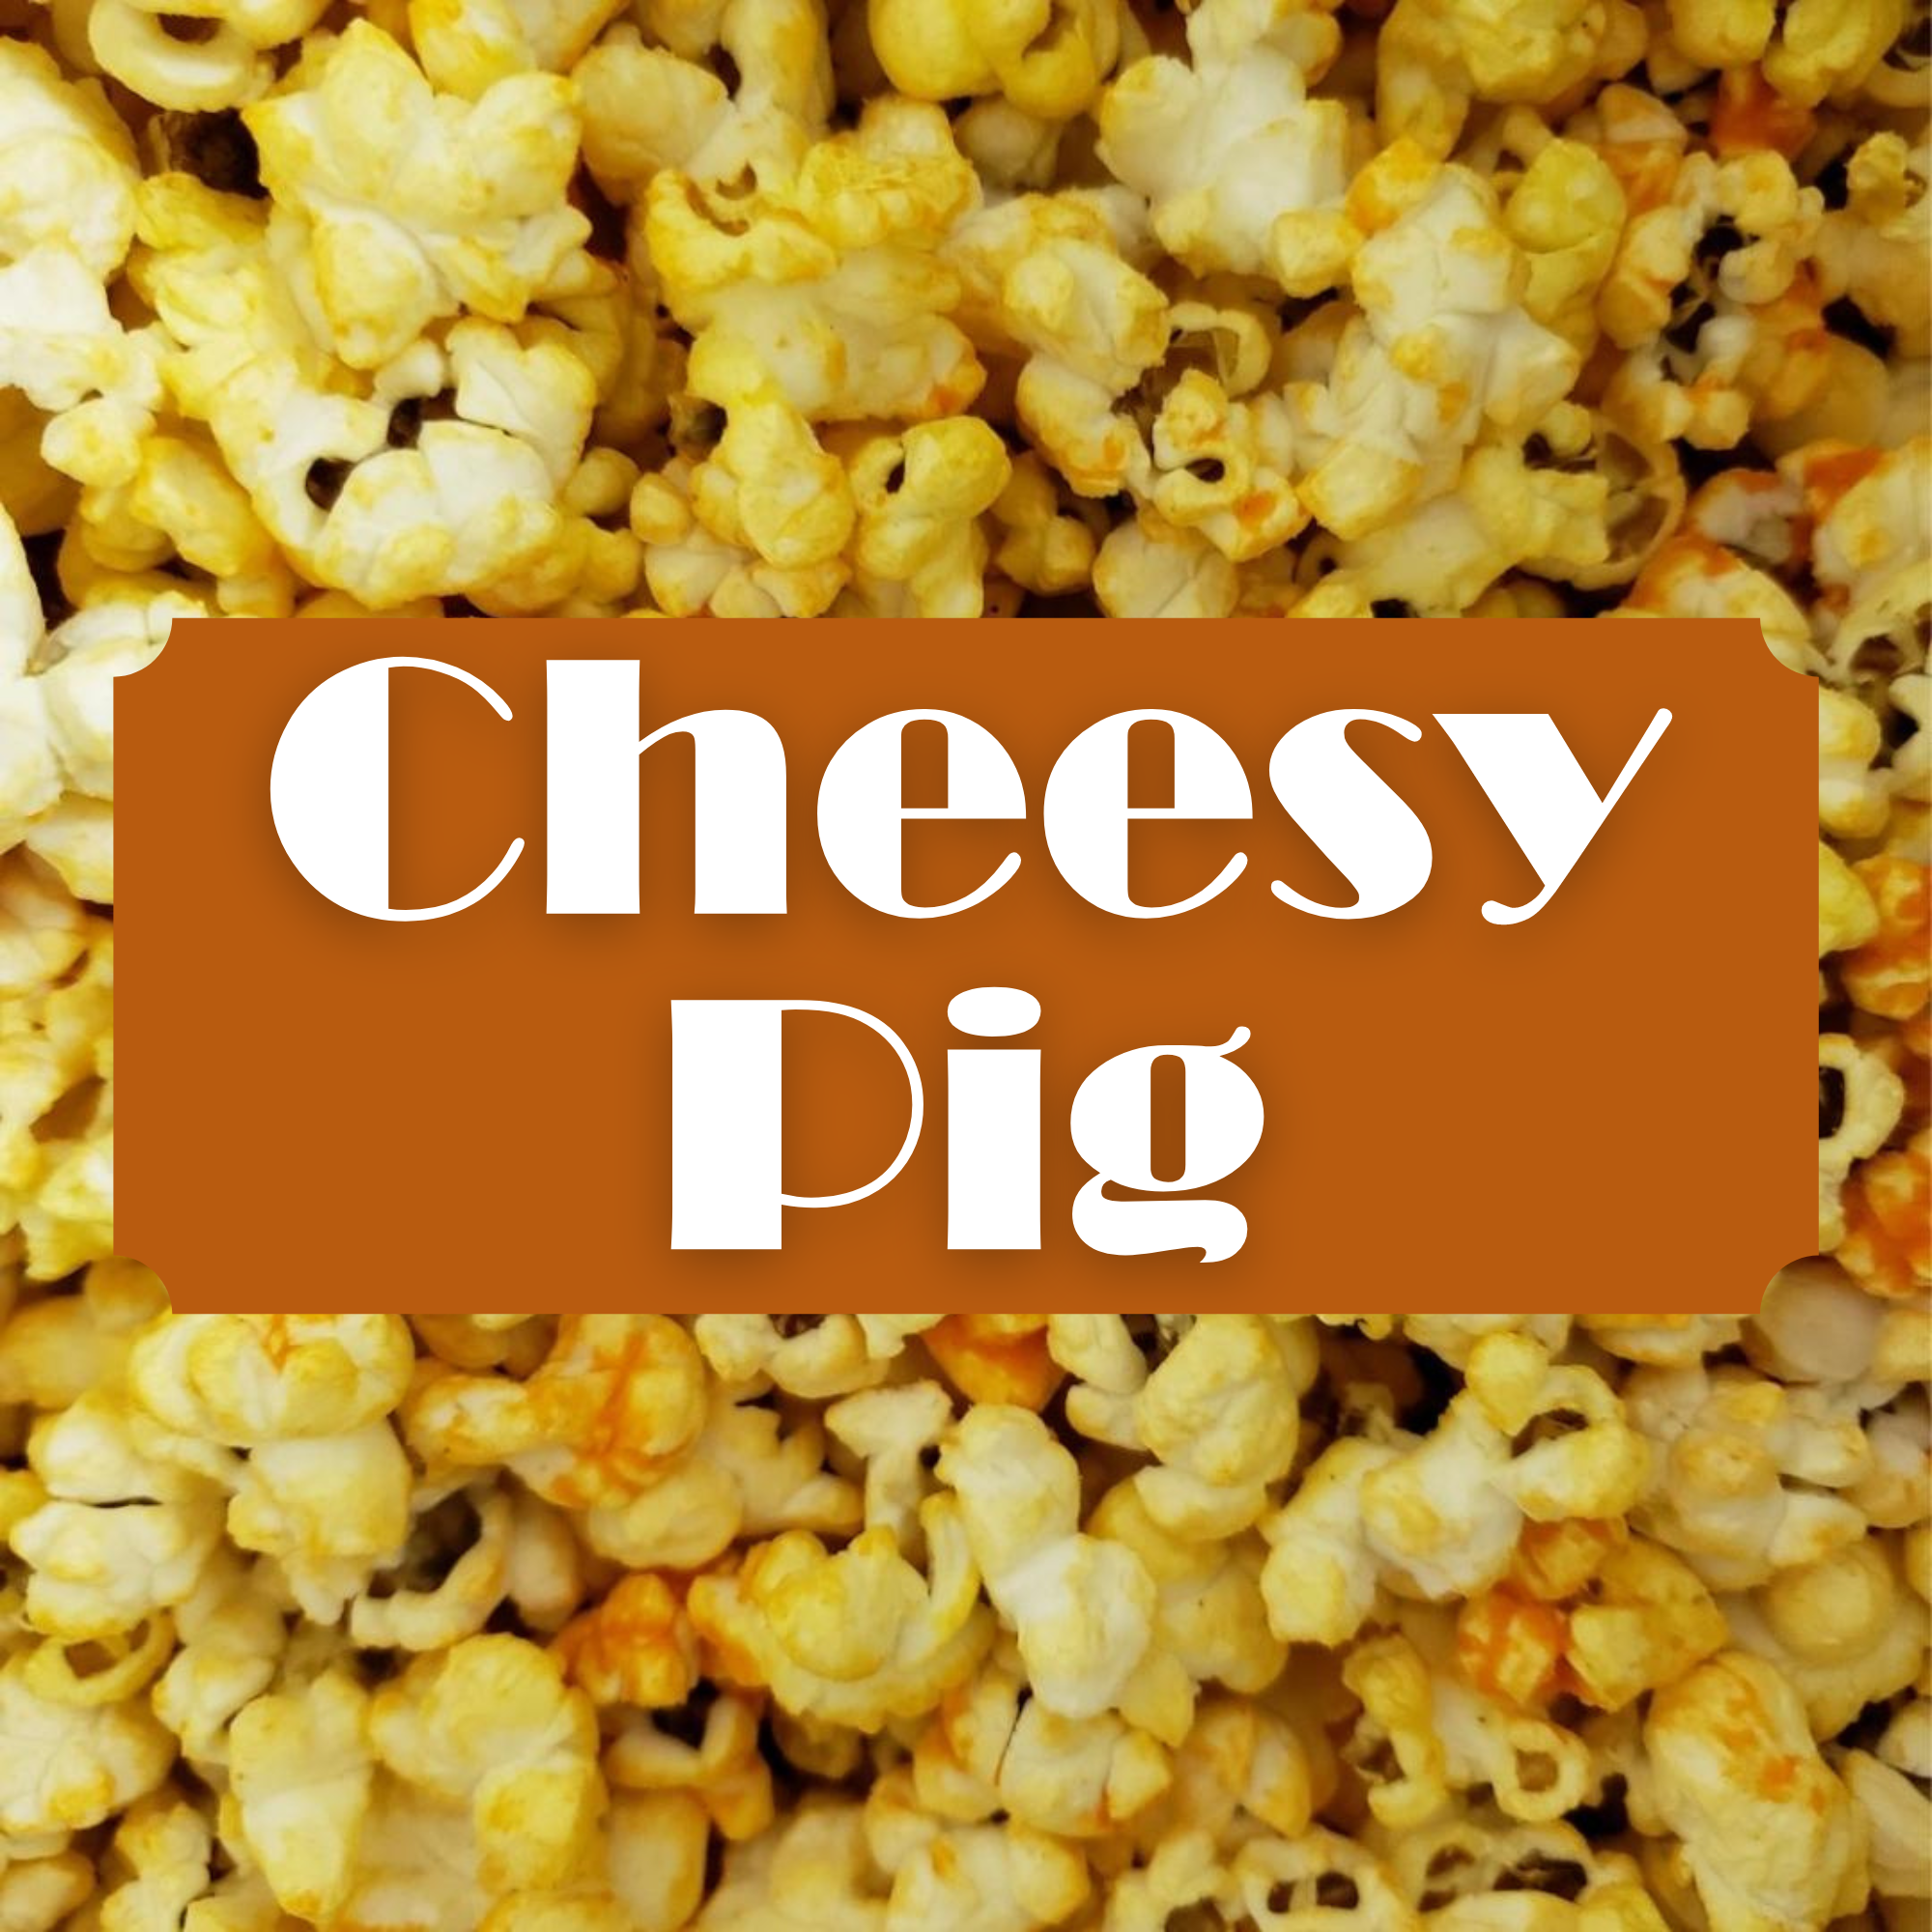 Cheesy Pig Popcorn Large Bags - Case of 8 ($2.99ea)